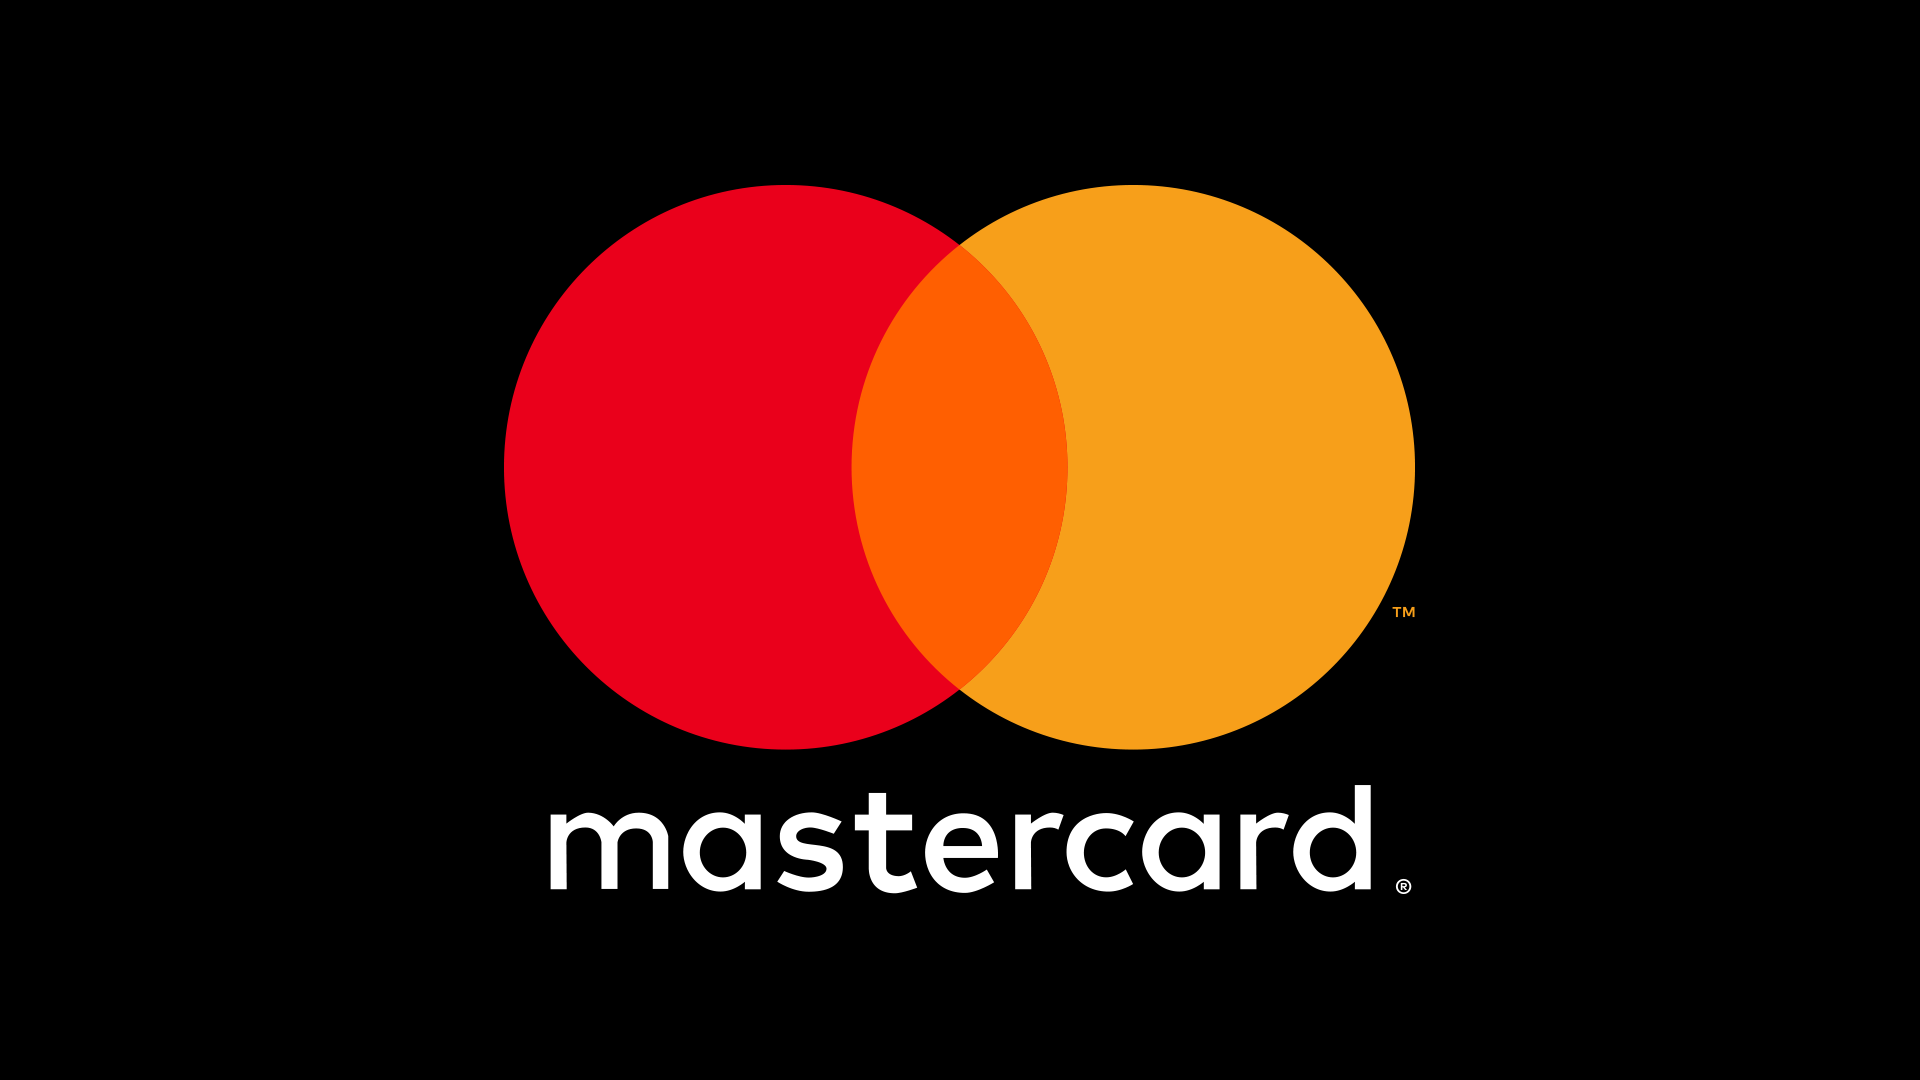 Live Chat With Senior Product Owner For Mastercard